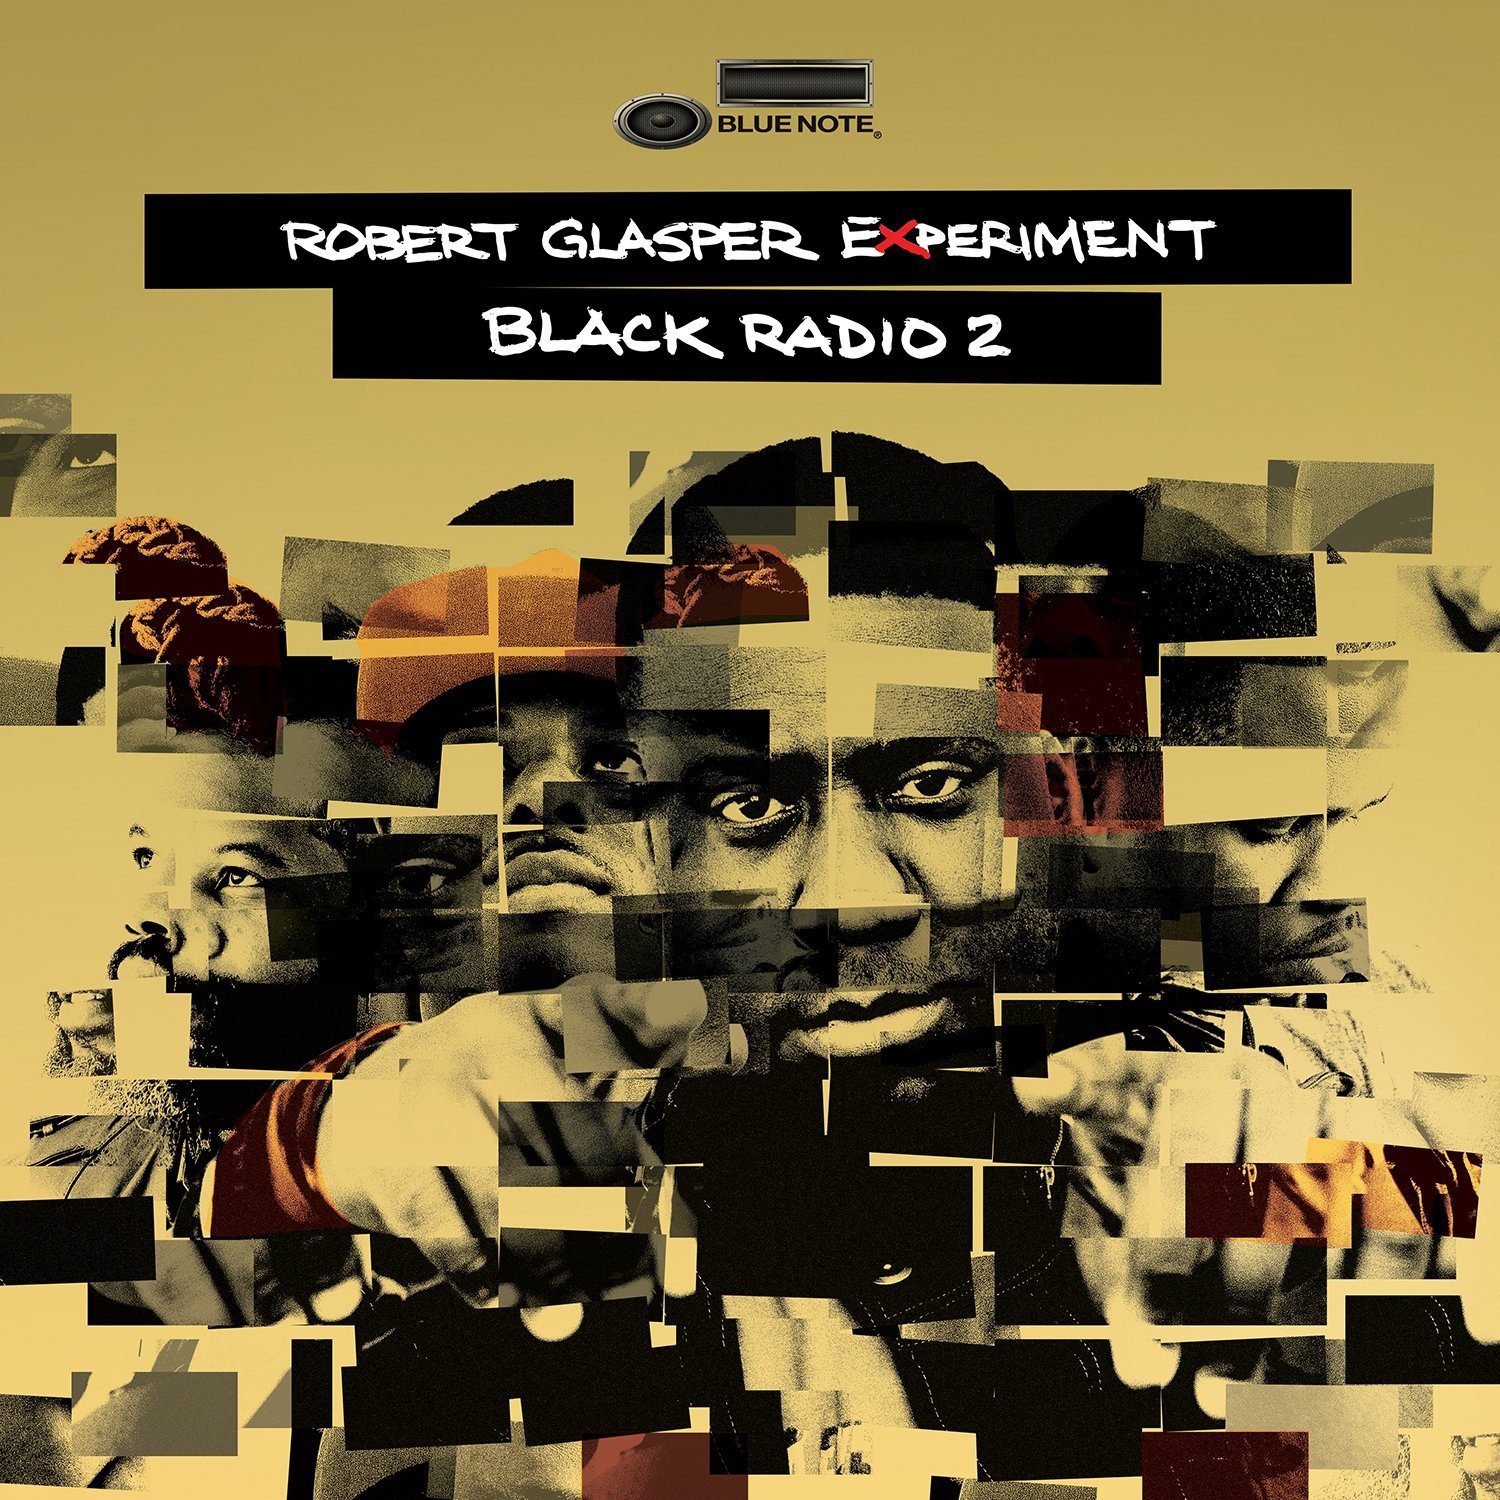 Robert Glasper Experiment Announces Release of "Black Radio 2" Available for Pre-Order